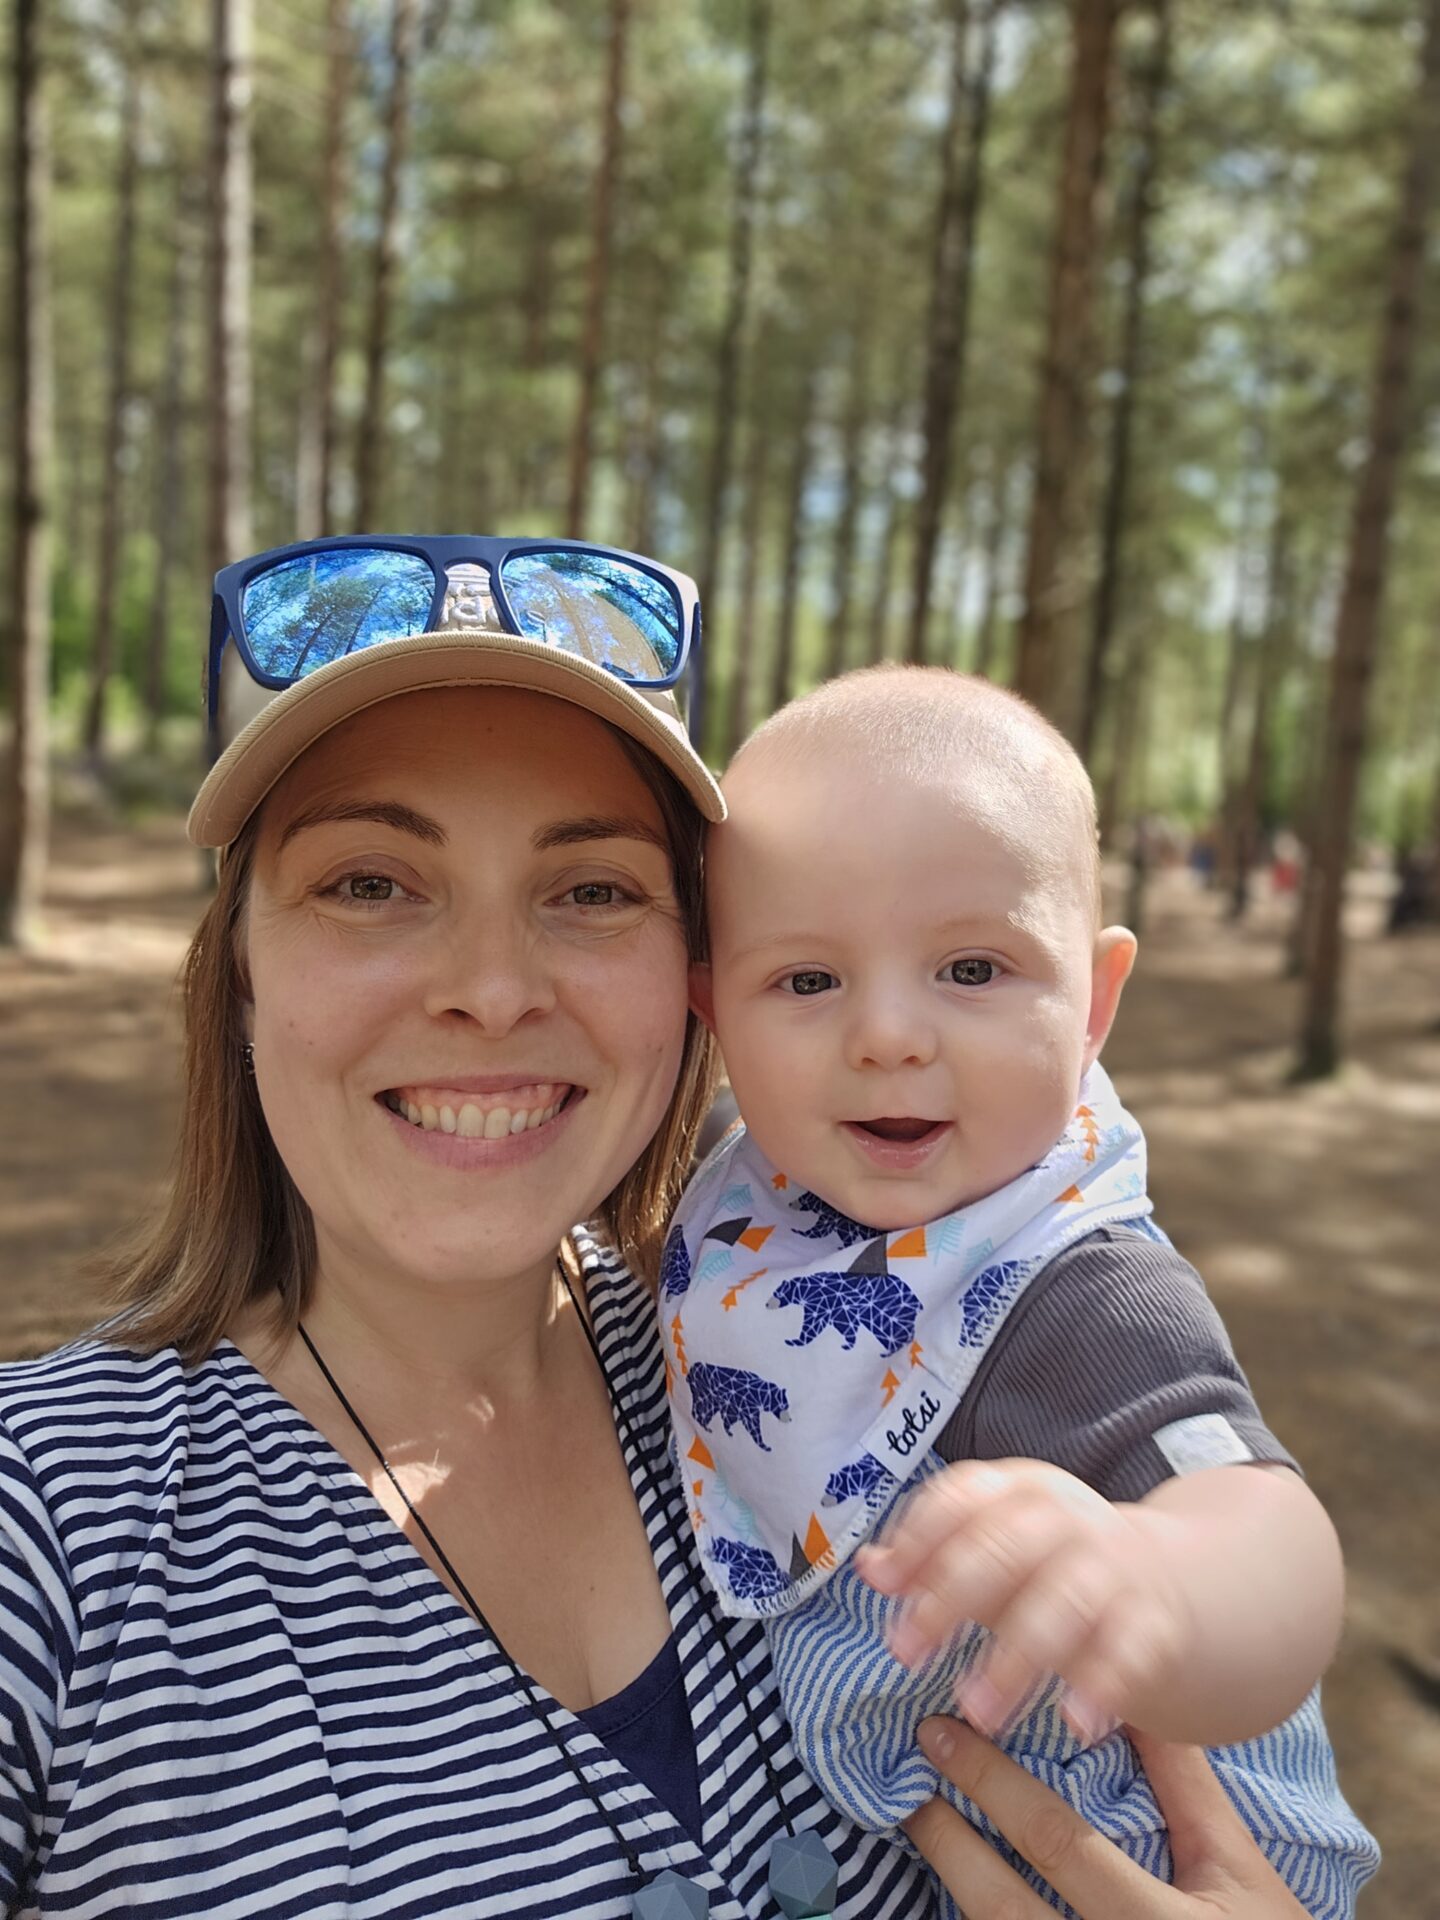 woman wearing a striped top and baseball cap is smiling at the camera. she is holding a baby in her arms who is  also smiling. the background is blurred but shows trees.